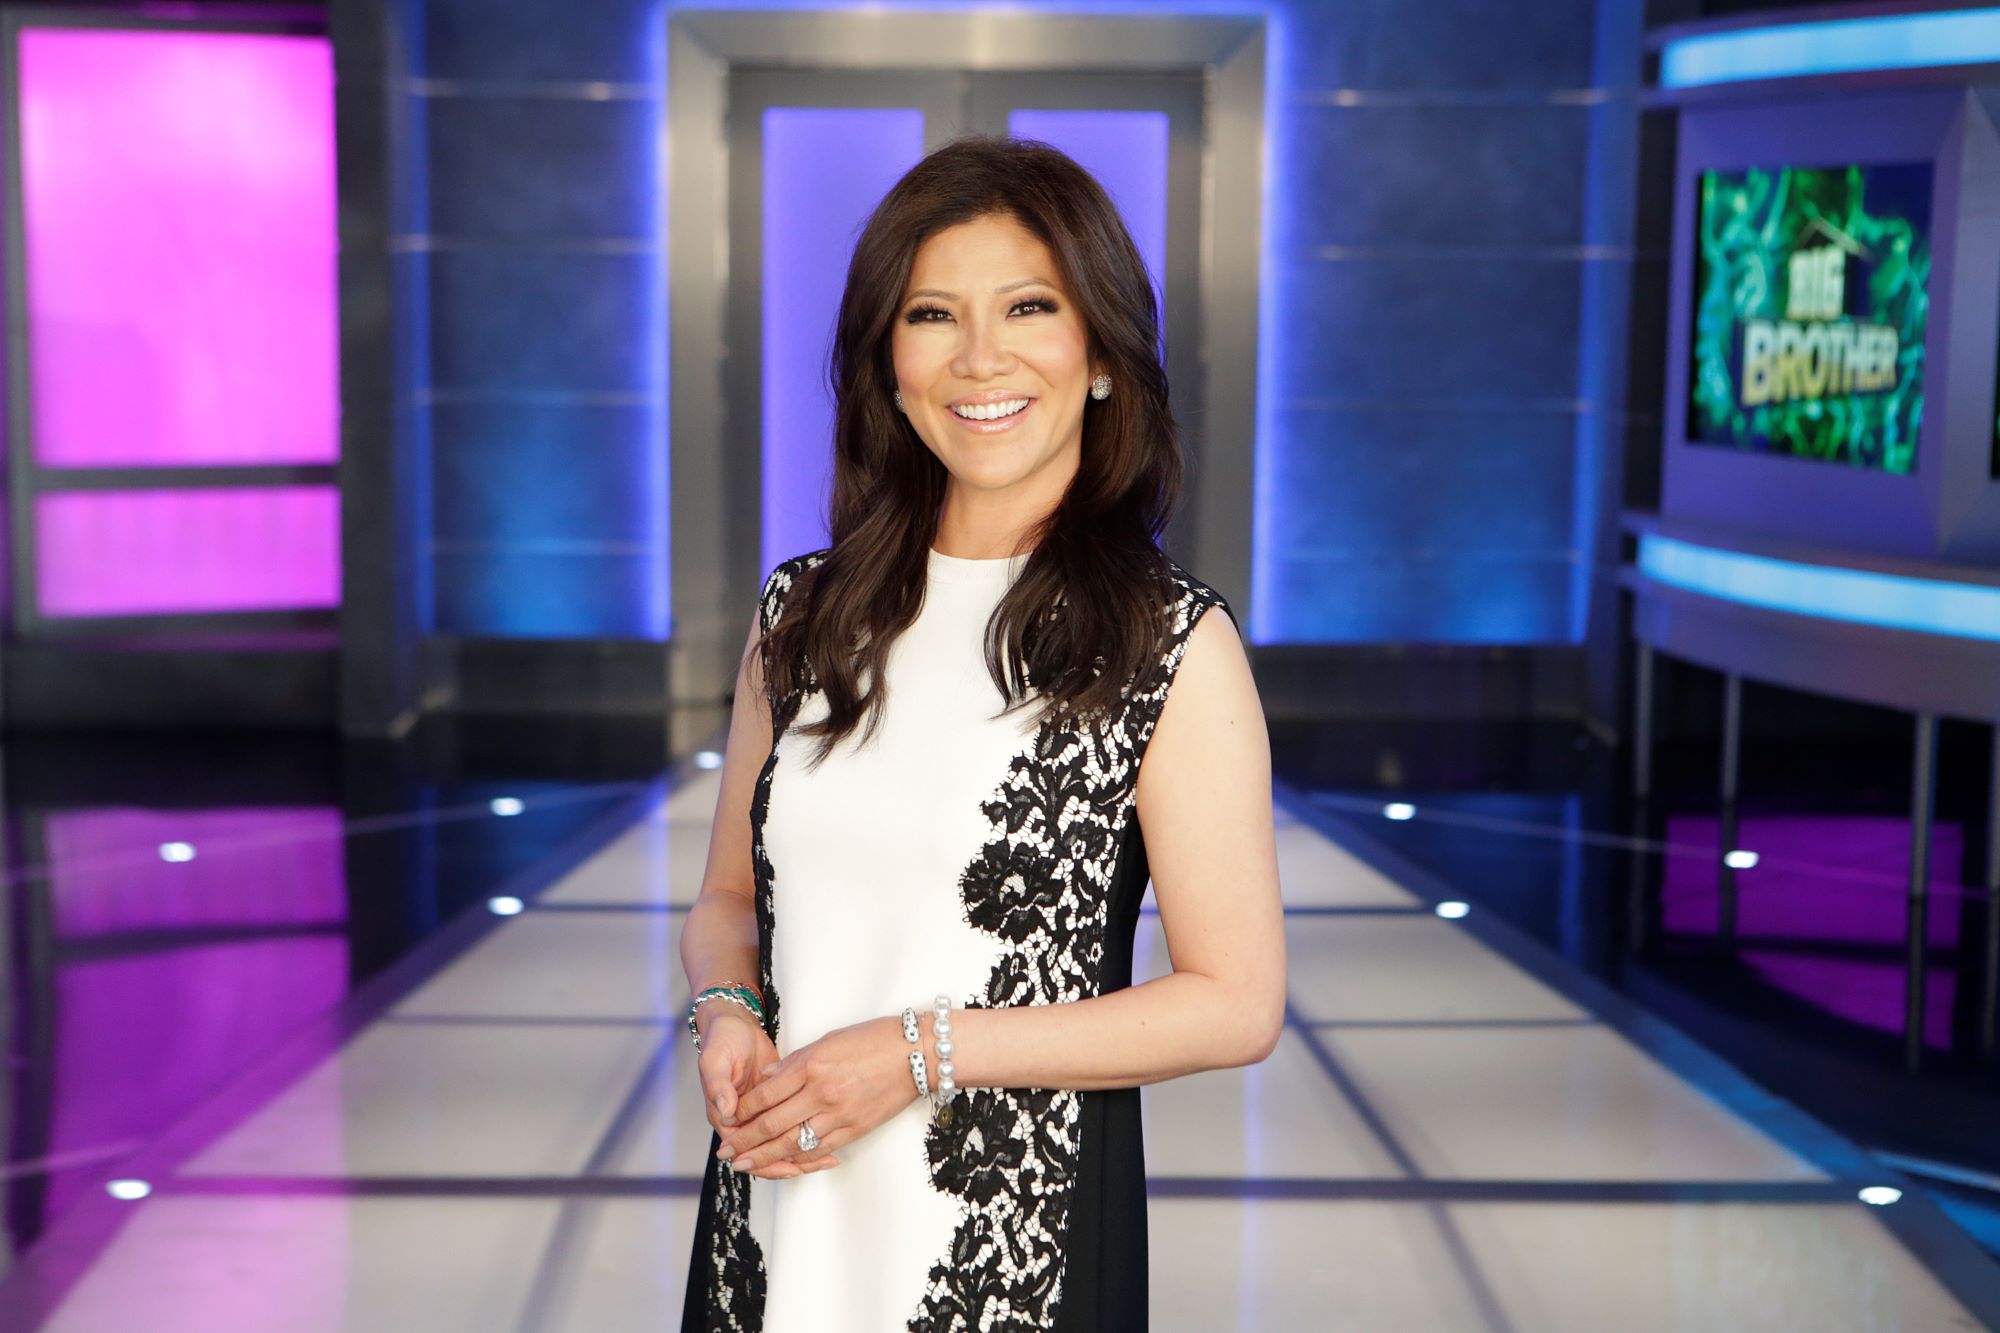 'Celebrity Big Brother' Season 3 host Julie Chen Moonves wears a white dress with black flowers.